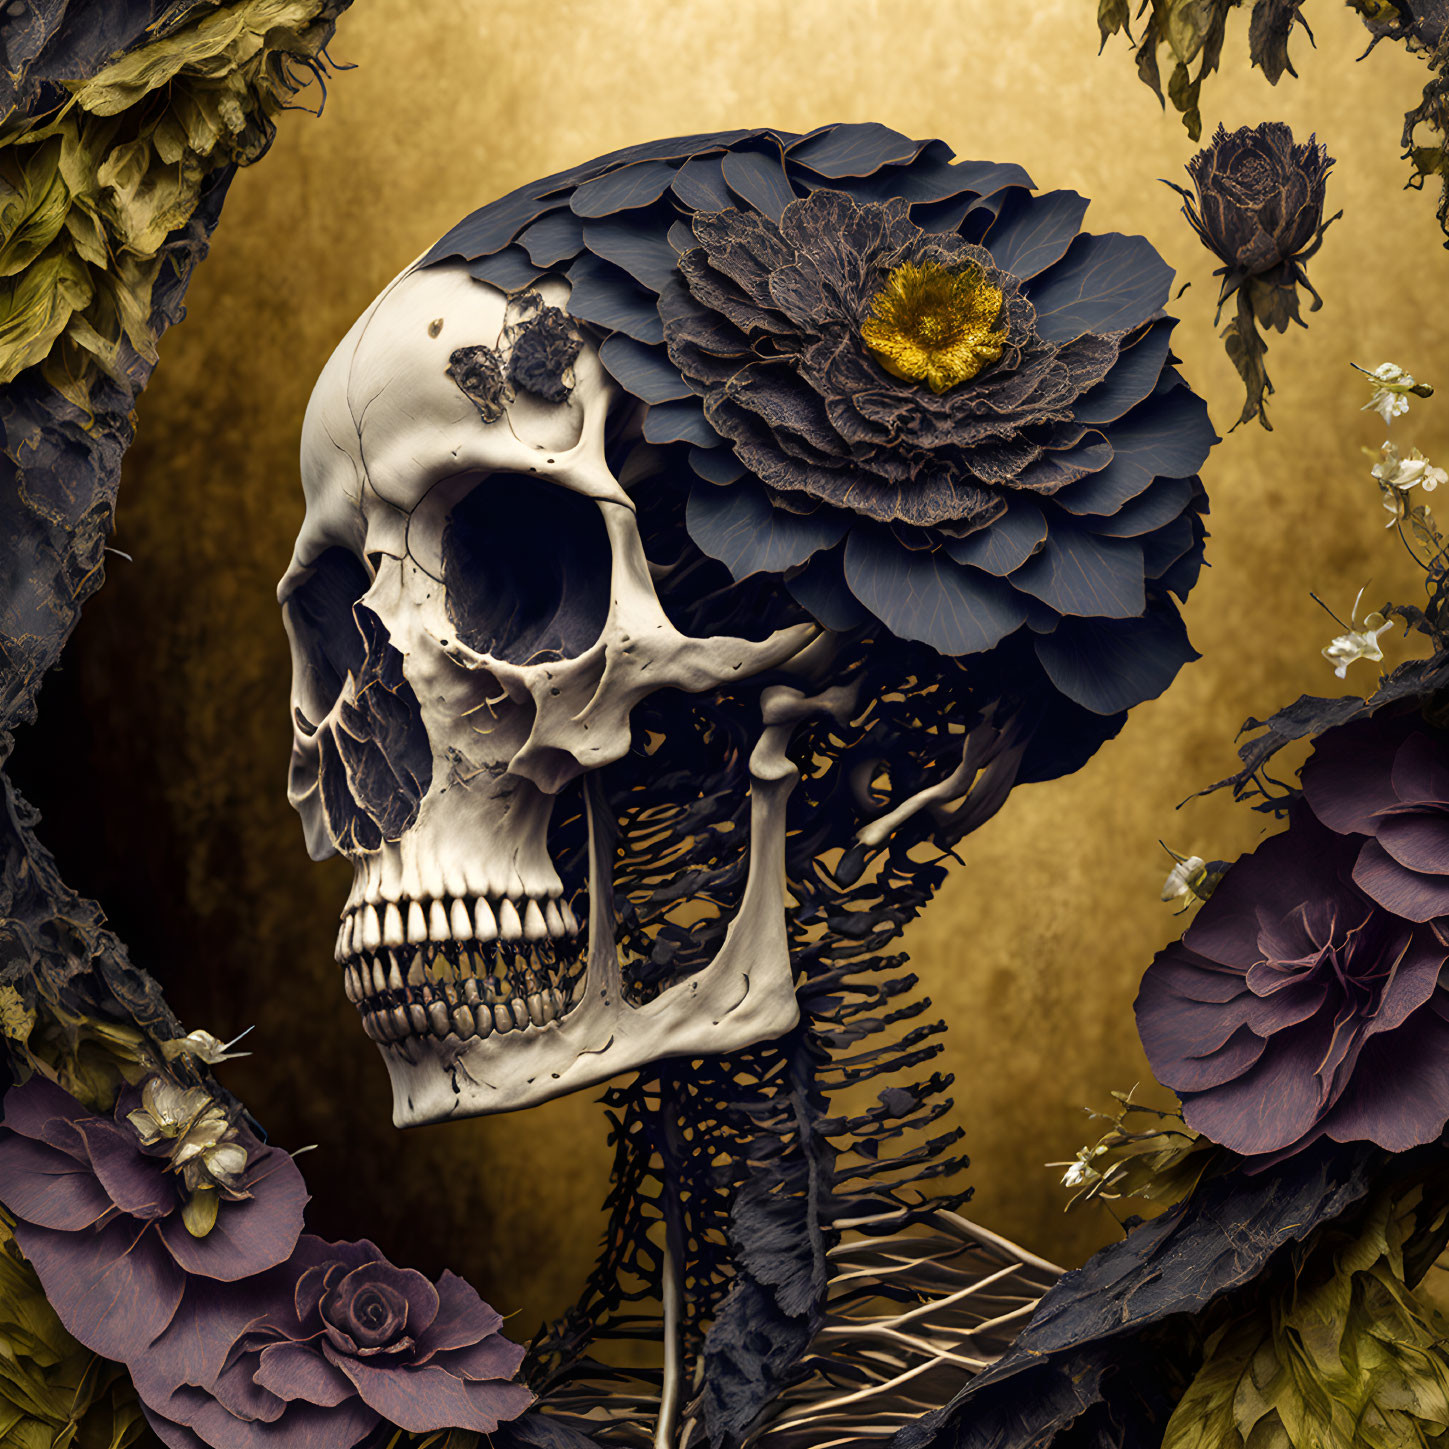 Surreal human skull with spine and dark flowers on golden textured background